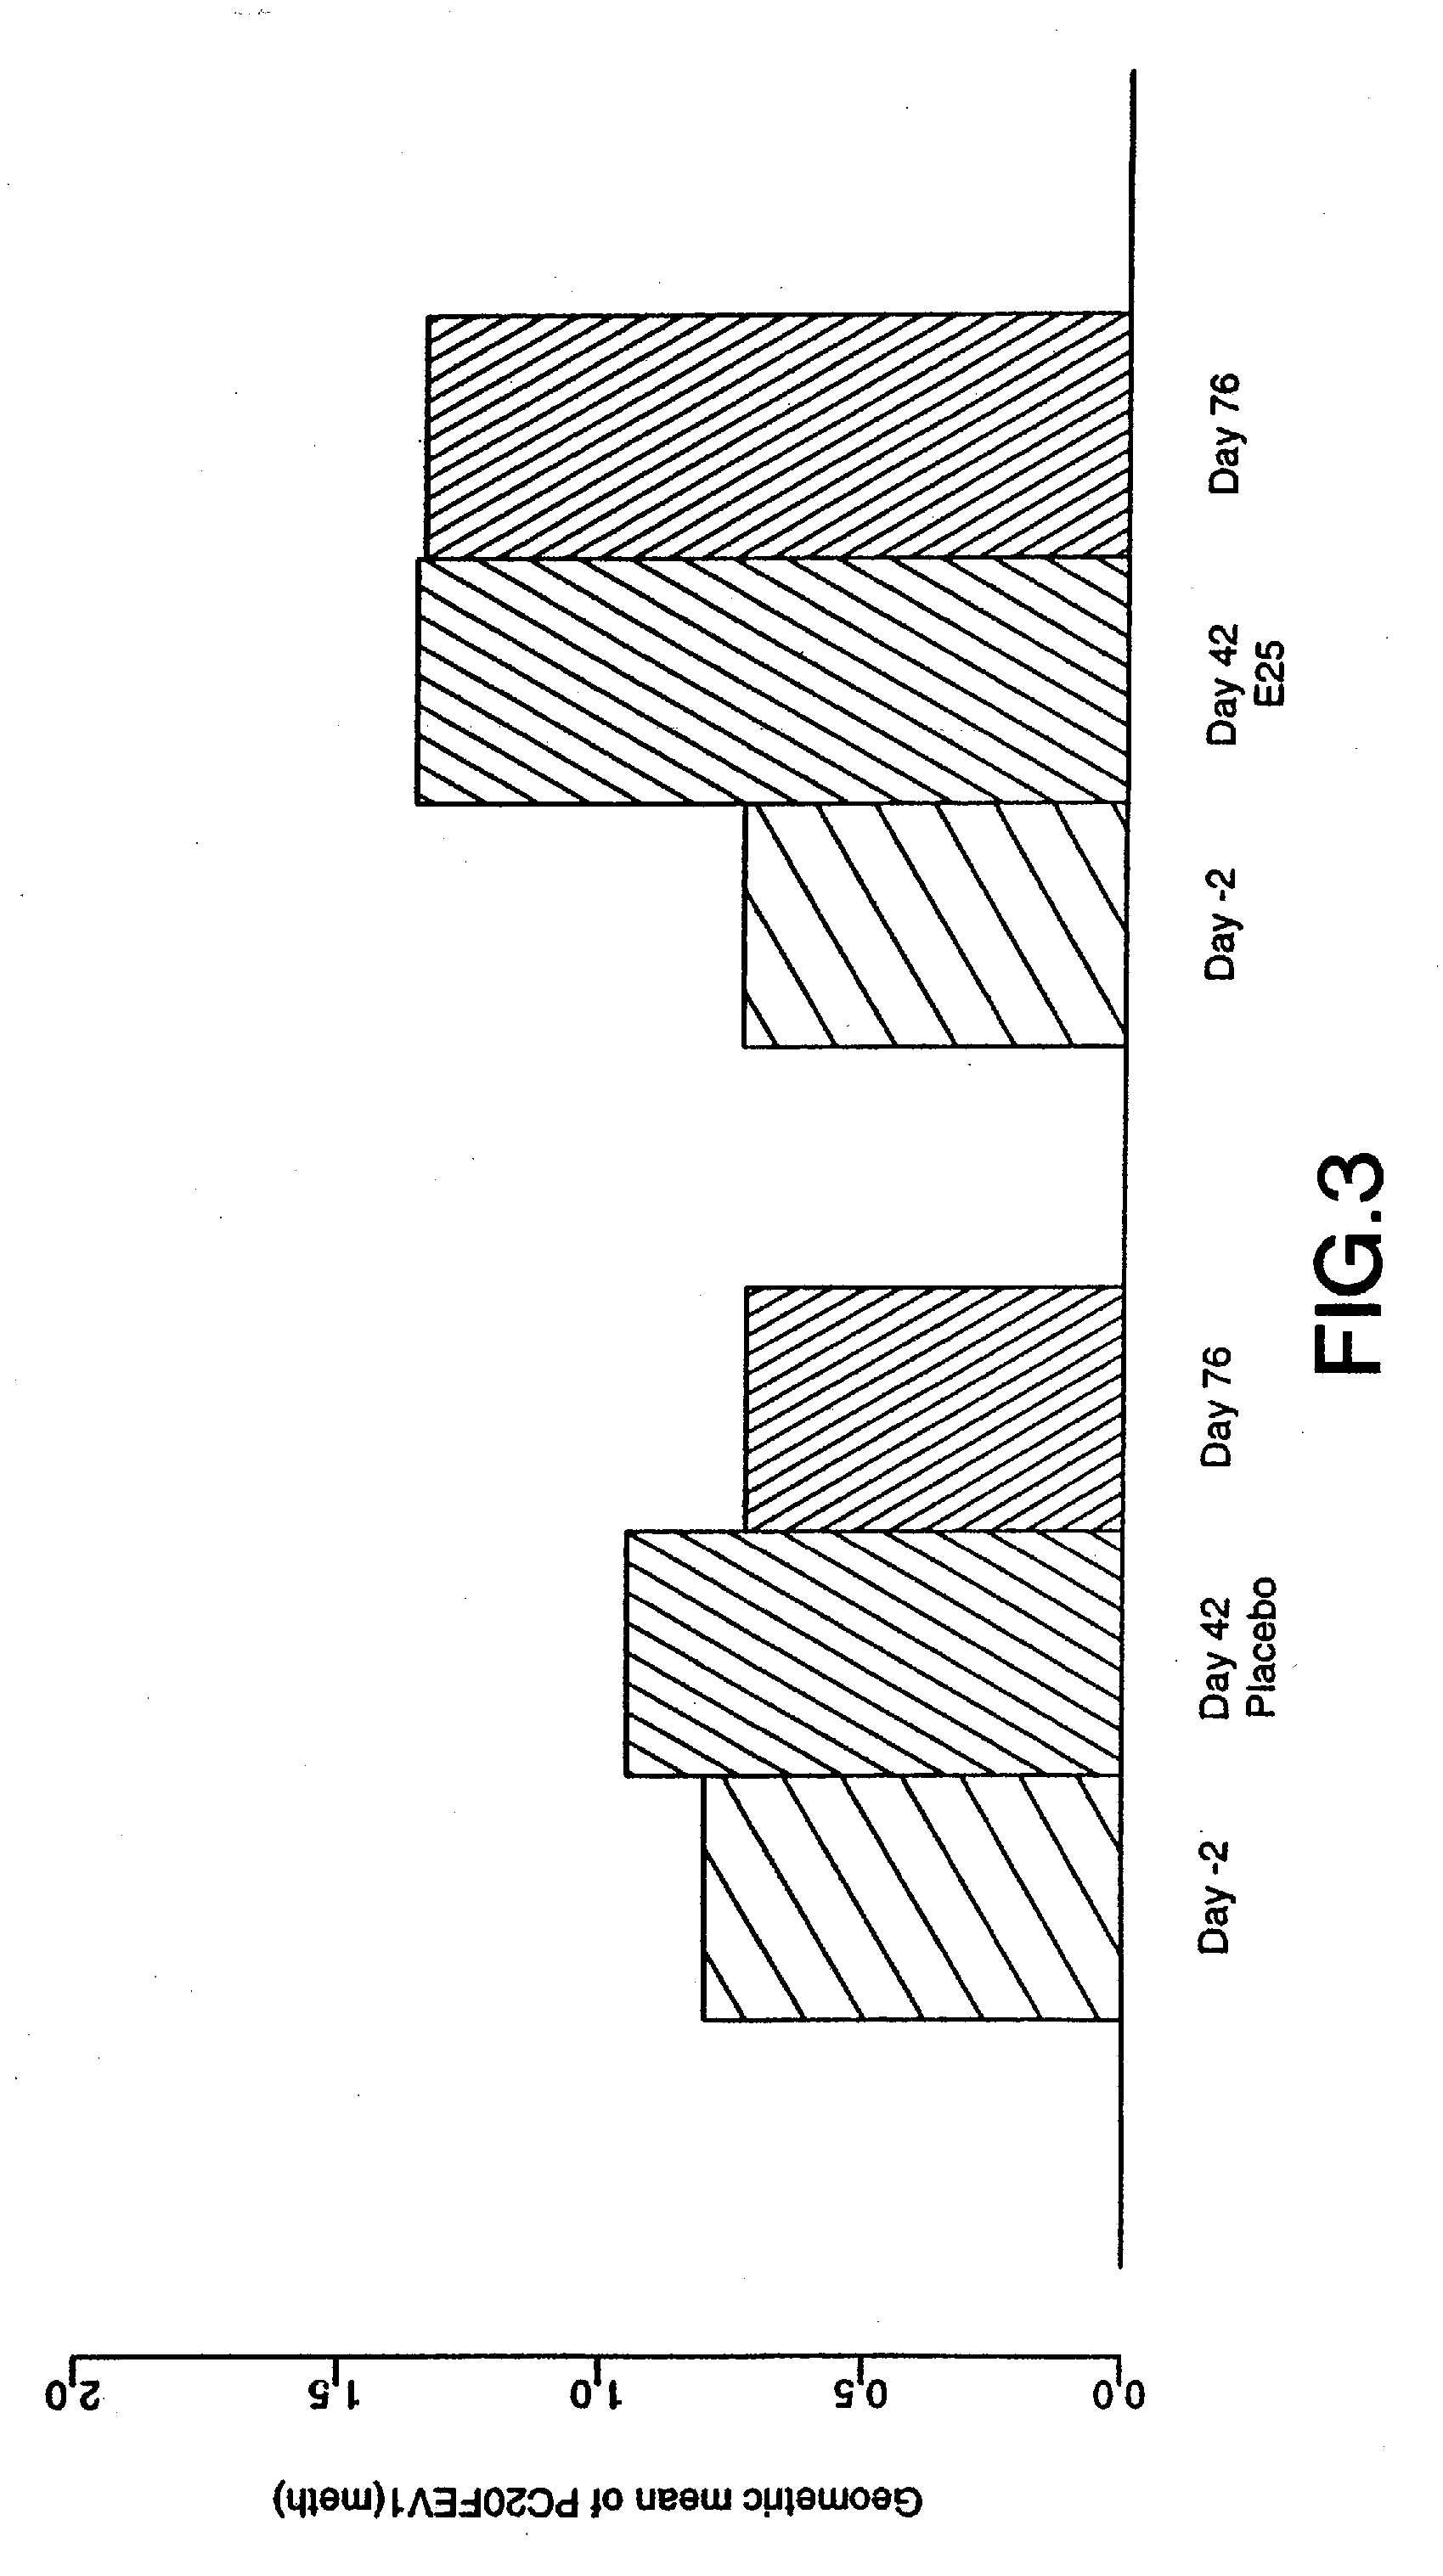 Methods for treatment of allergic asthma